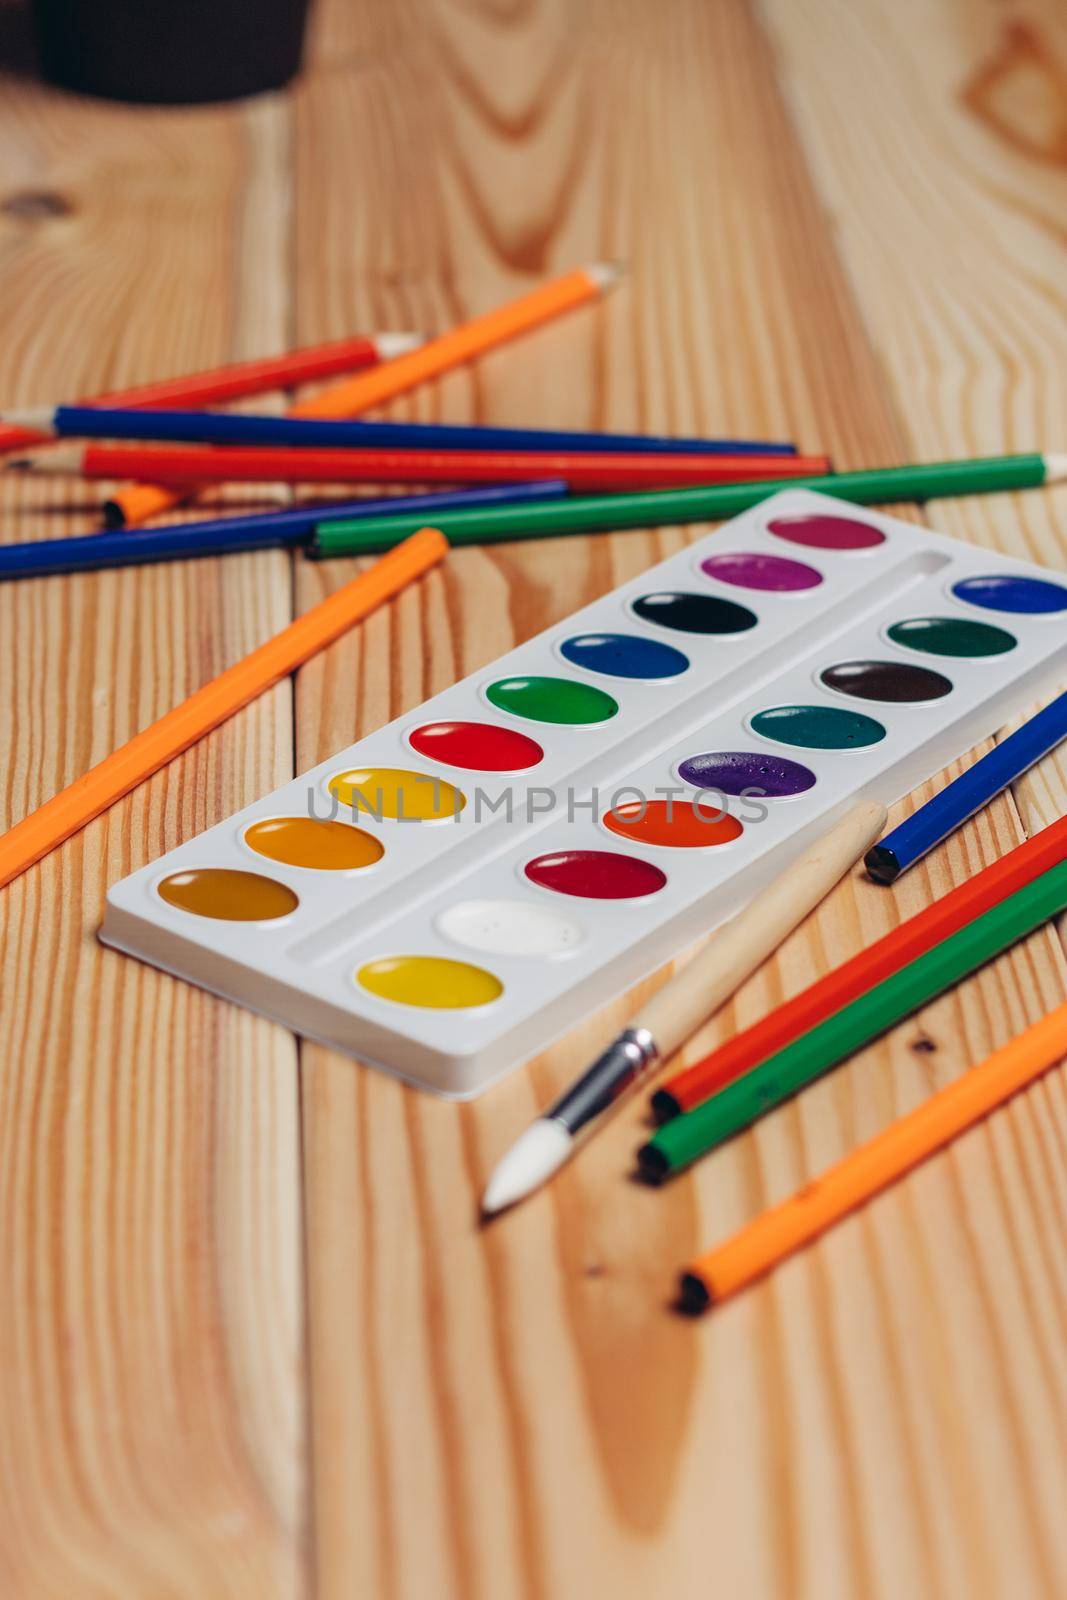 stationery colored pencils paint wooden table. High quality photo